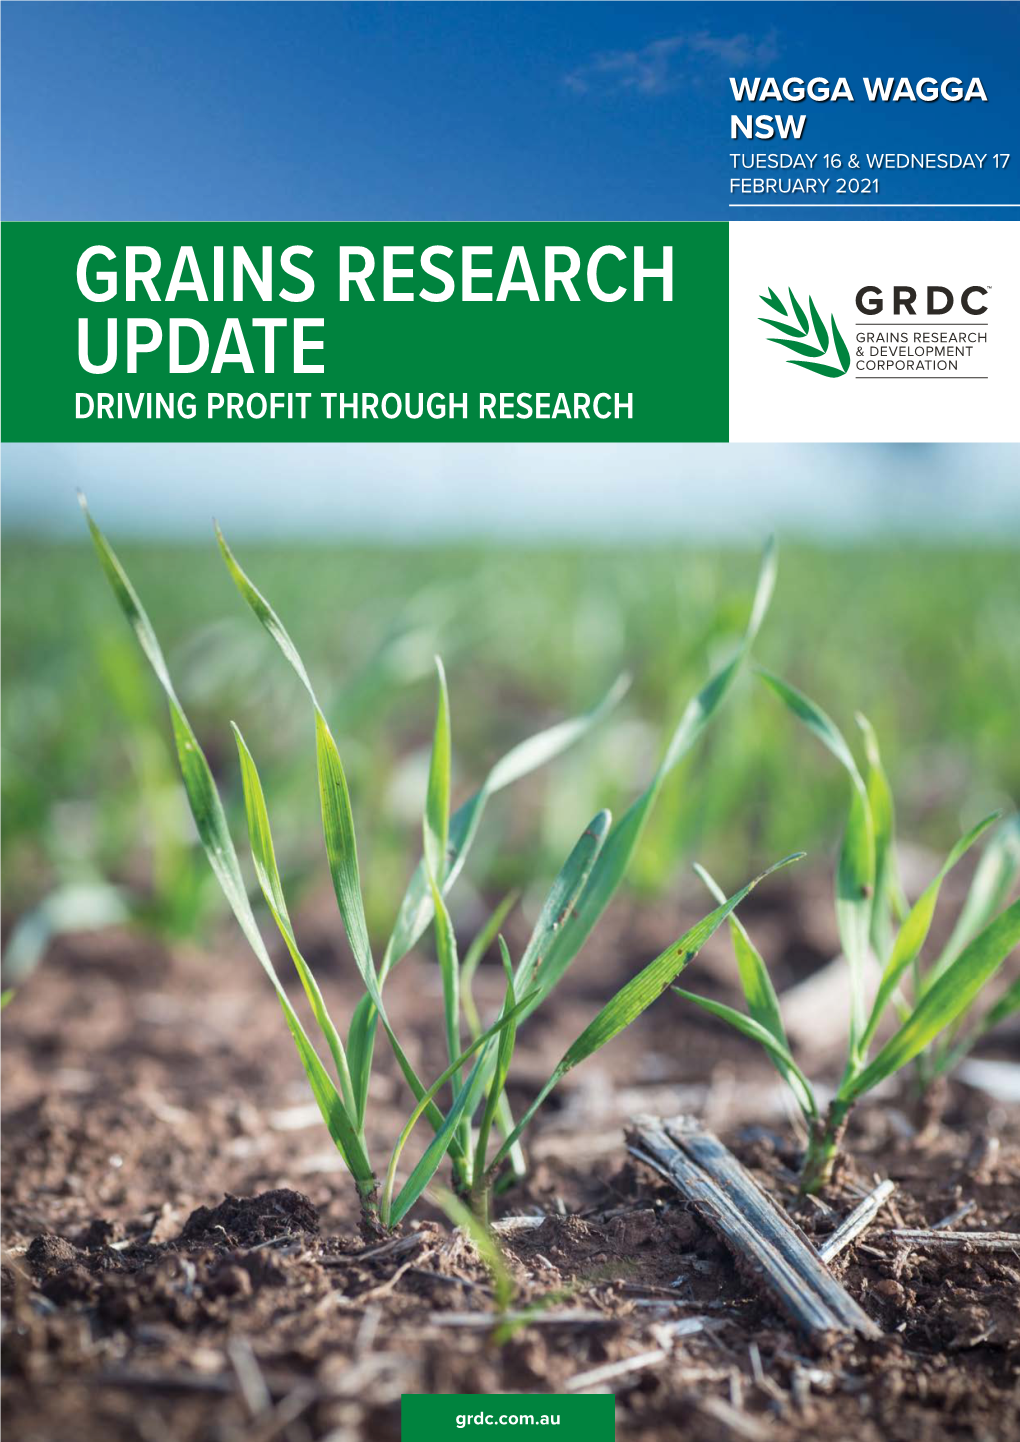 Grains Research Update Driving Profit Through Research